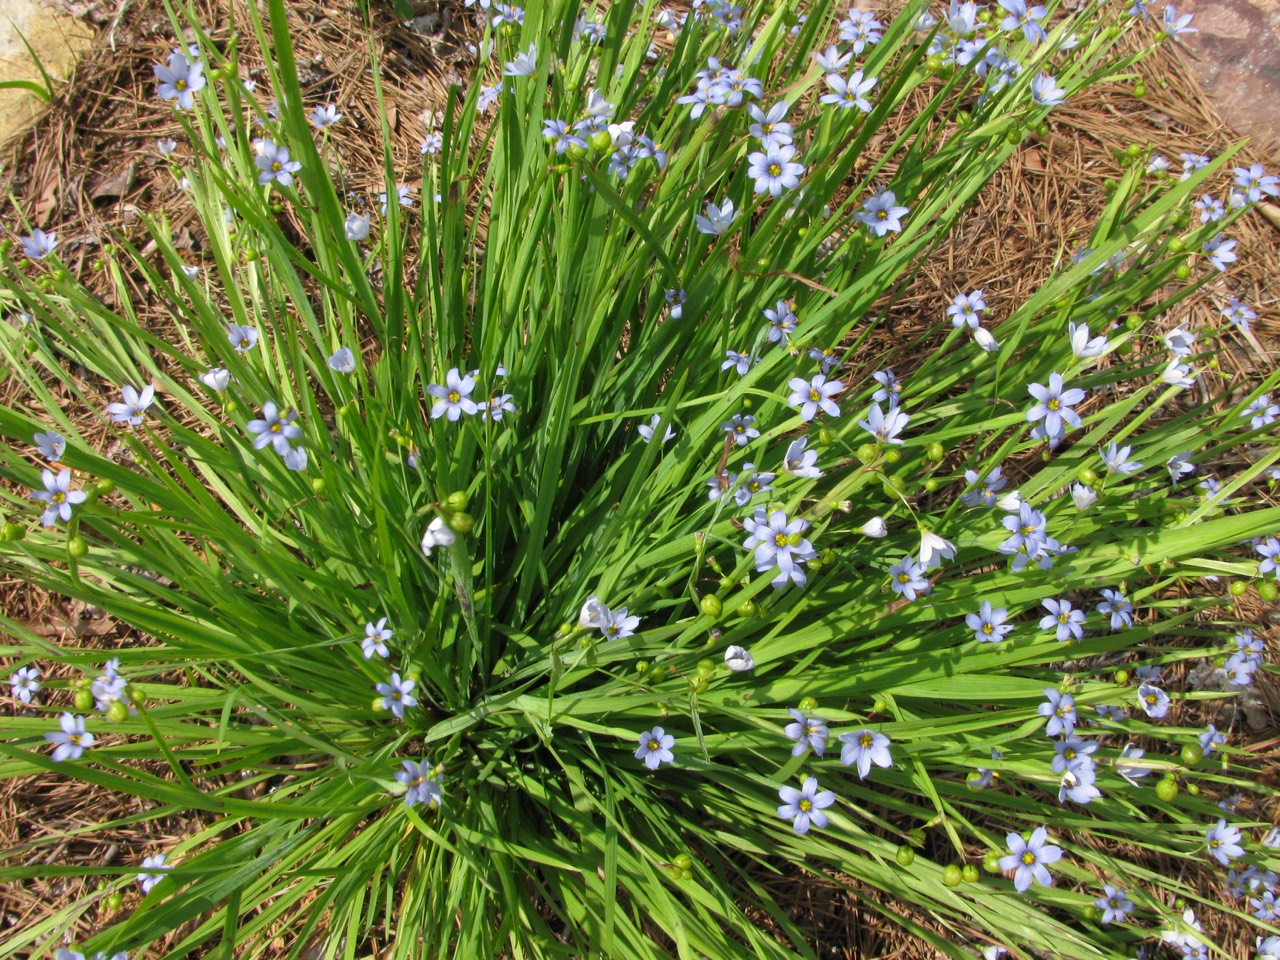 The Scientific Name is Sisyrinchium angustifolium. You will likely hear them called Narrowleaf Blue-eyed grass. This picture shows the Close-up of large, vigorous clump. of Sisyrinchium angustifolium